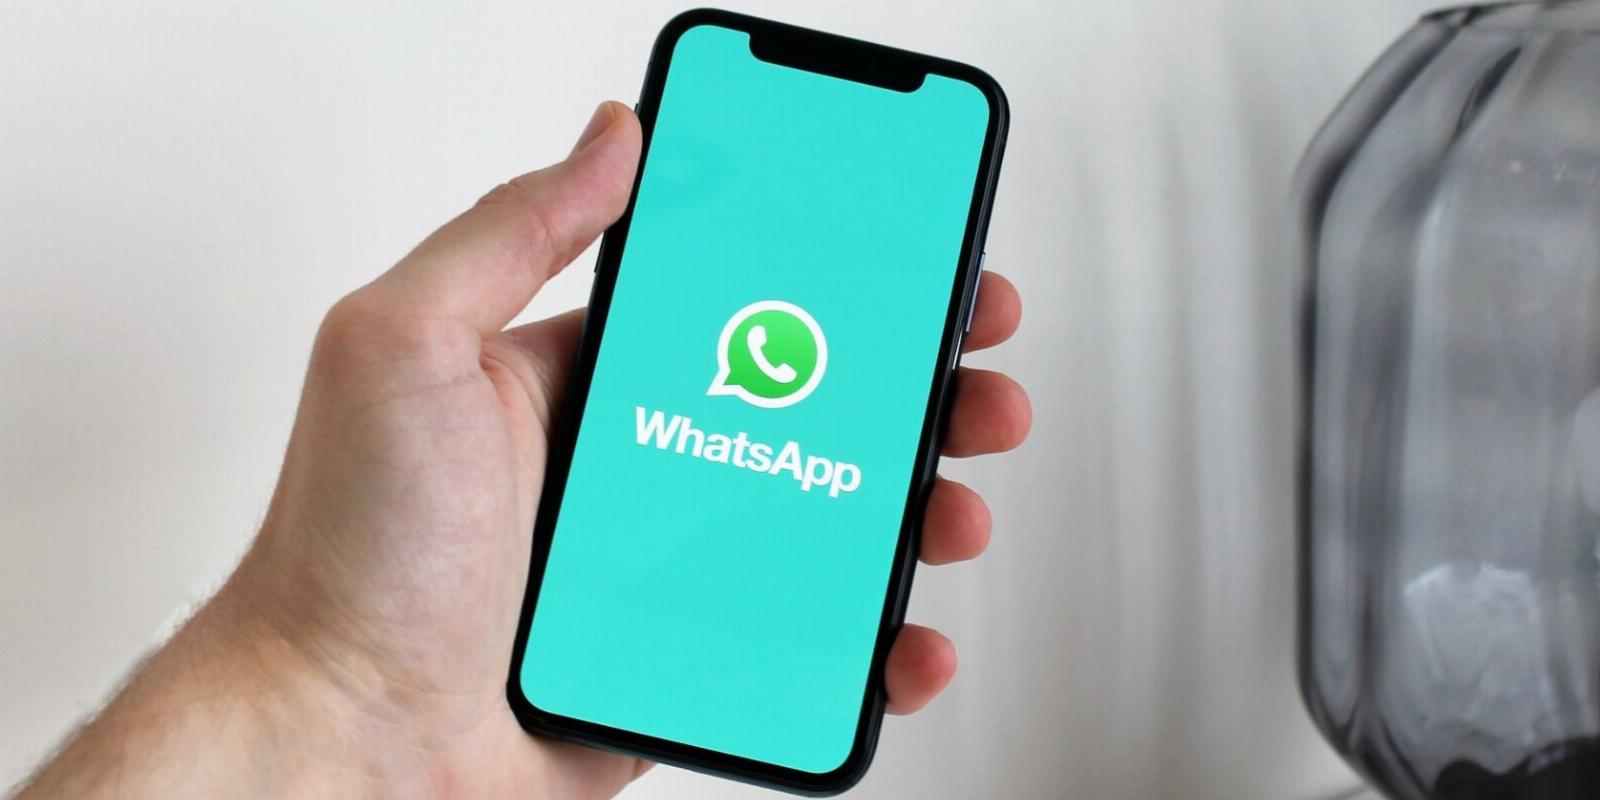 6 Ways to Customize WhatsApp for a Personalized Experience